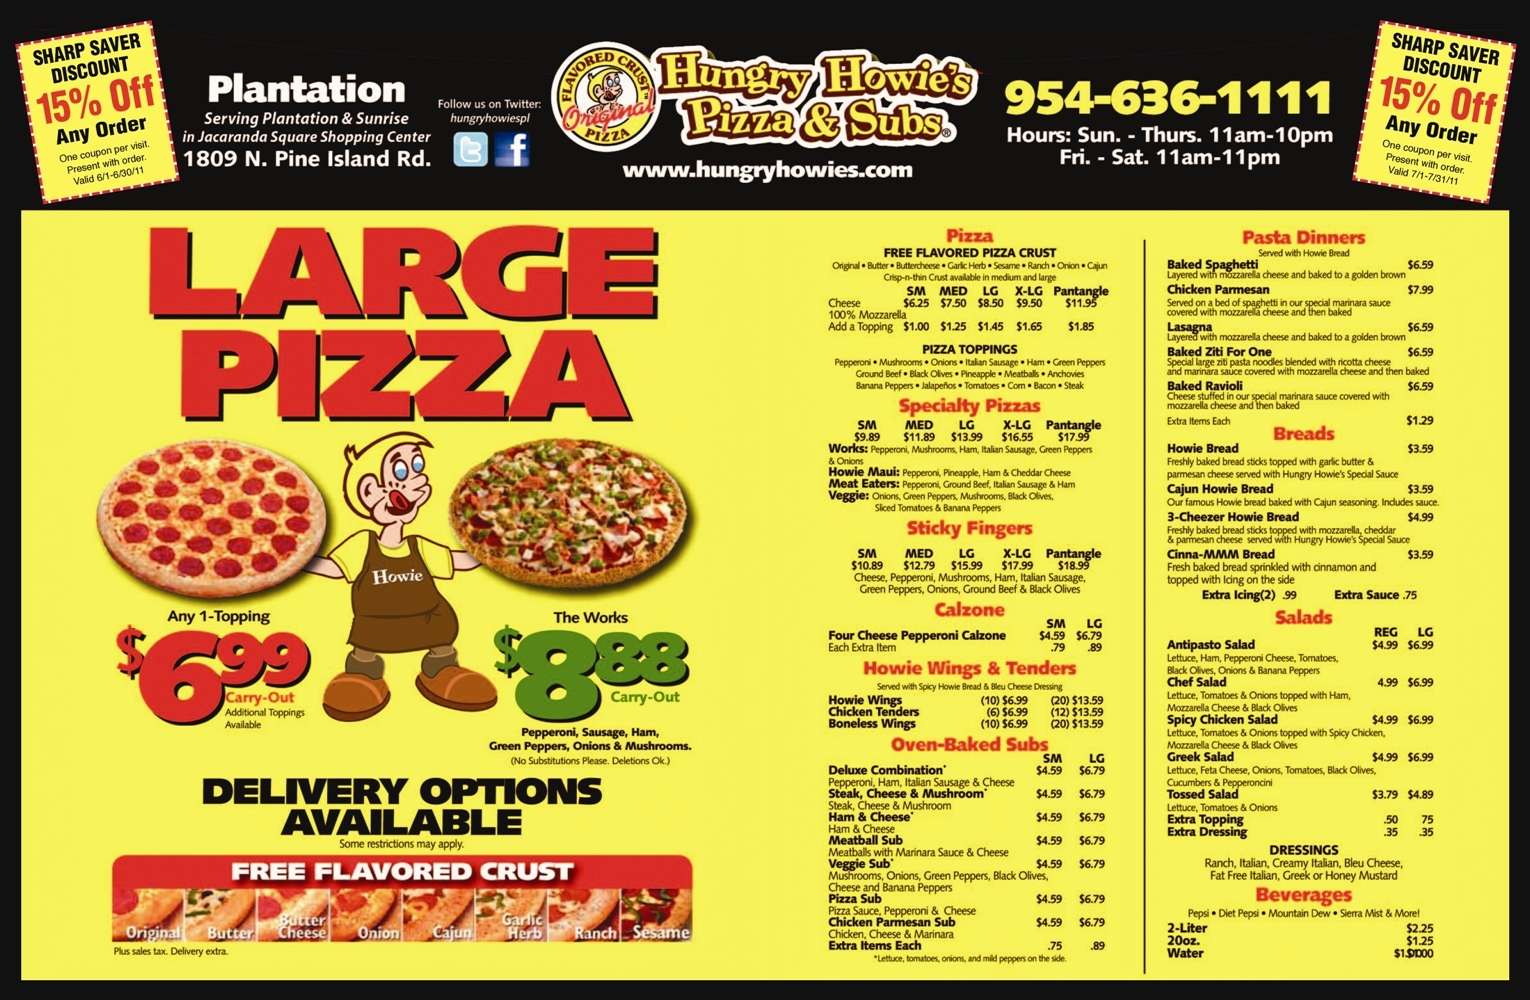 Hungry Howie's Pizza & Subs Menu - Urbanspoon/Zomato